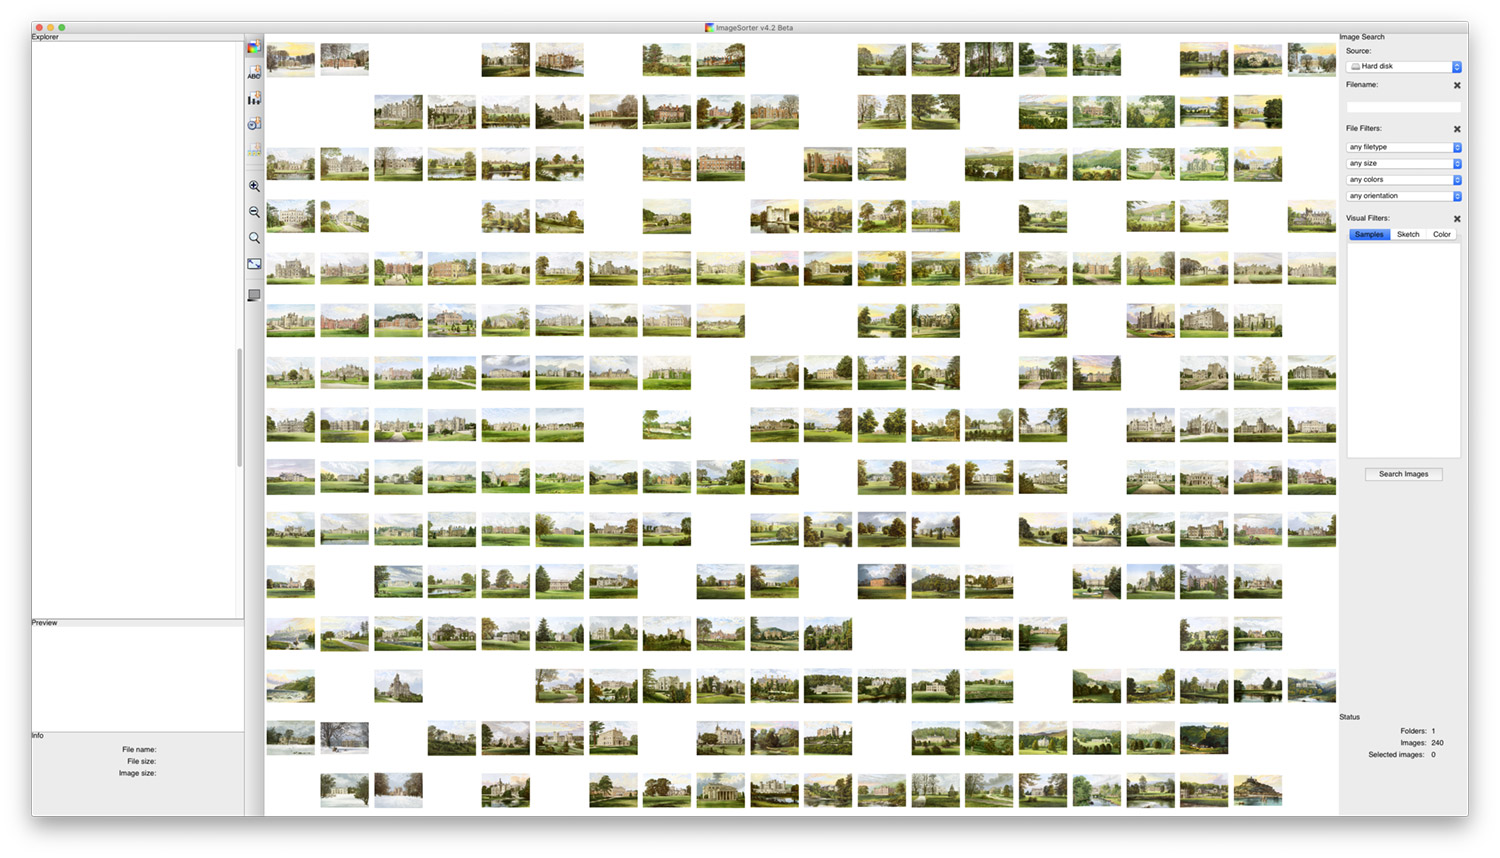 Screenshot of illustrations sorted by color in ImageSorter with gaps